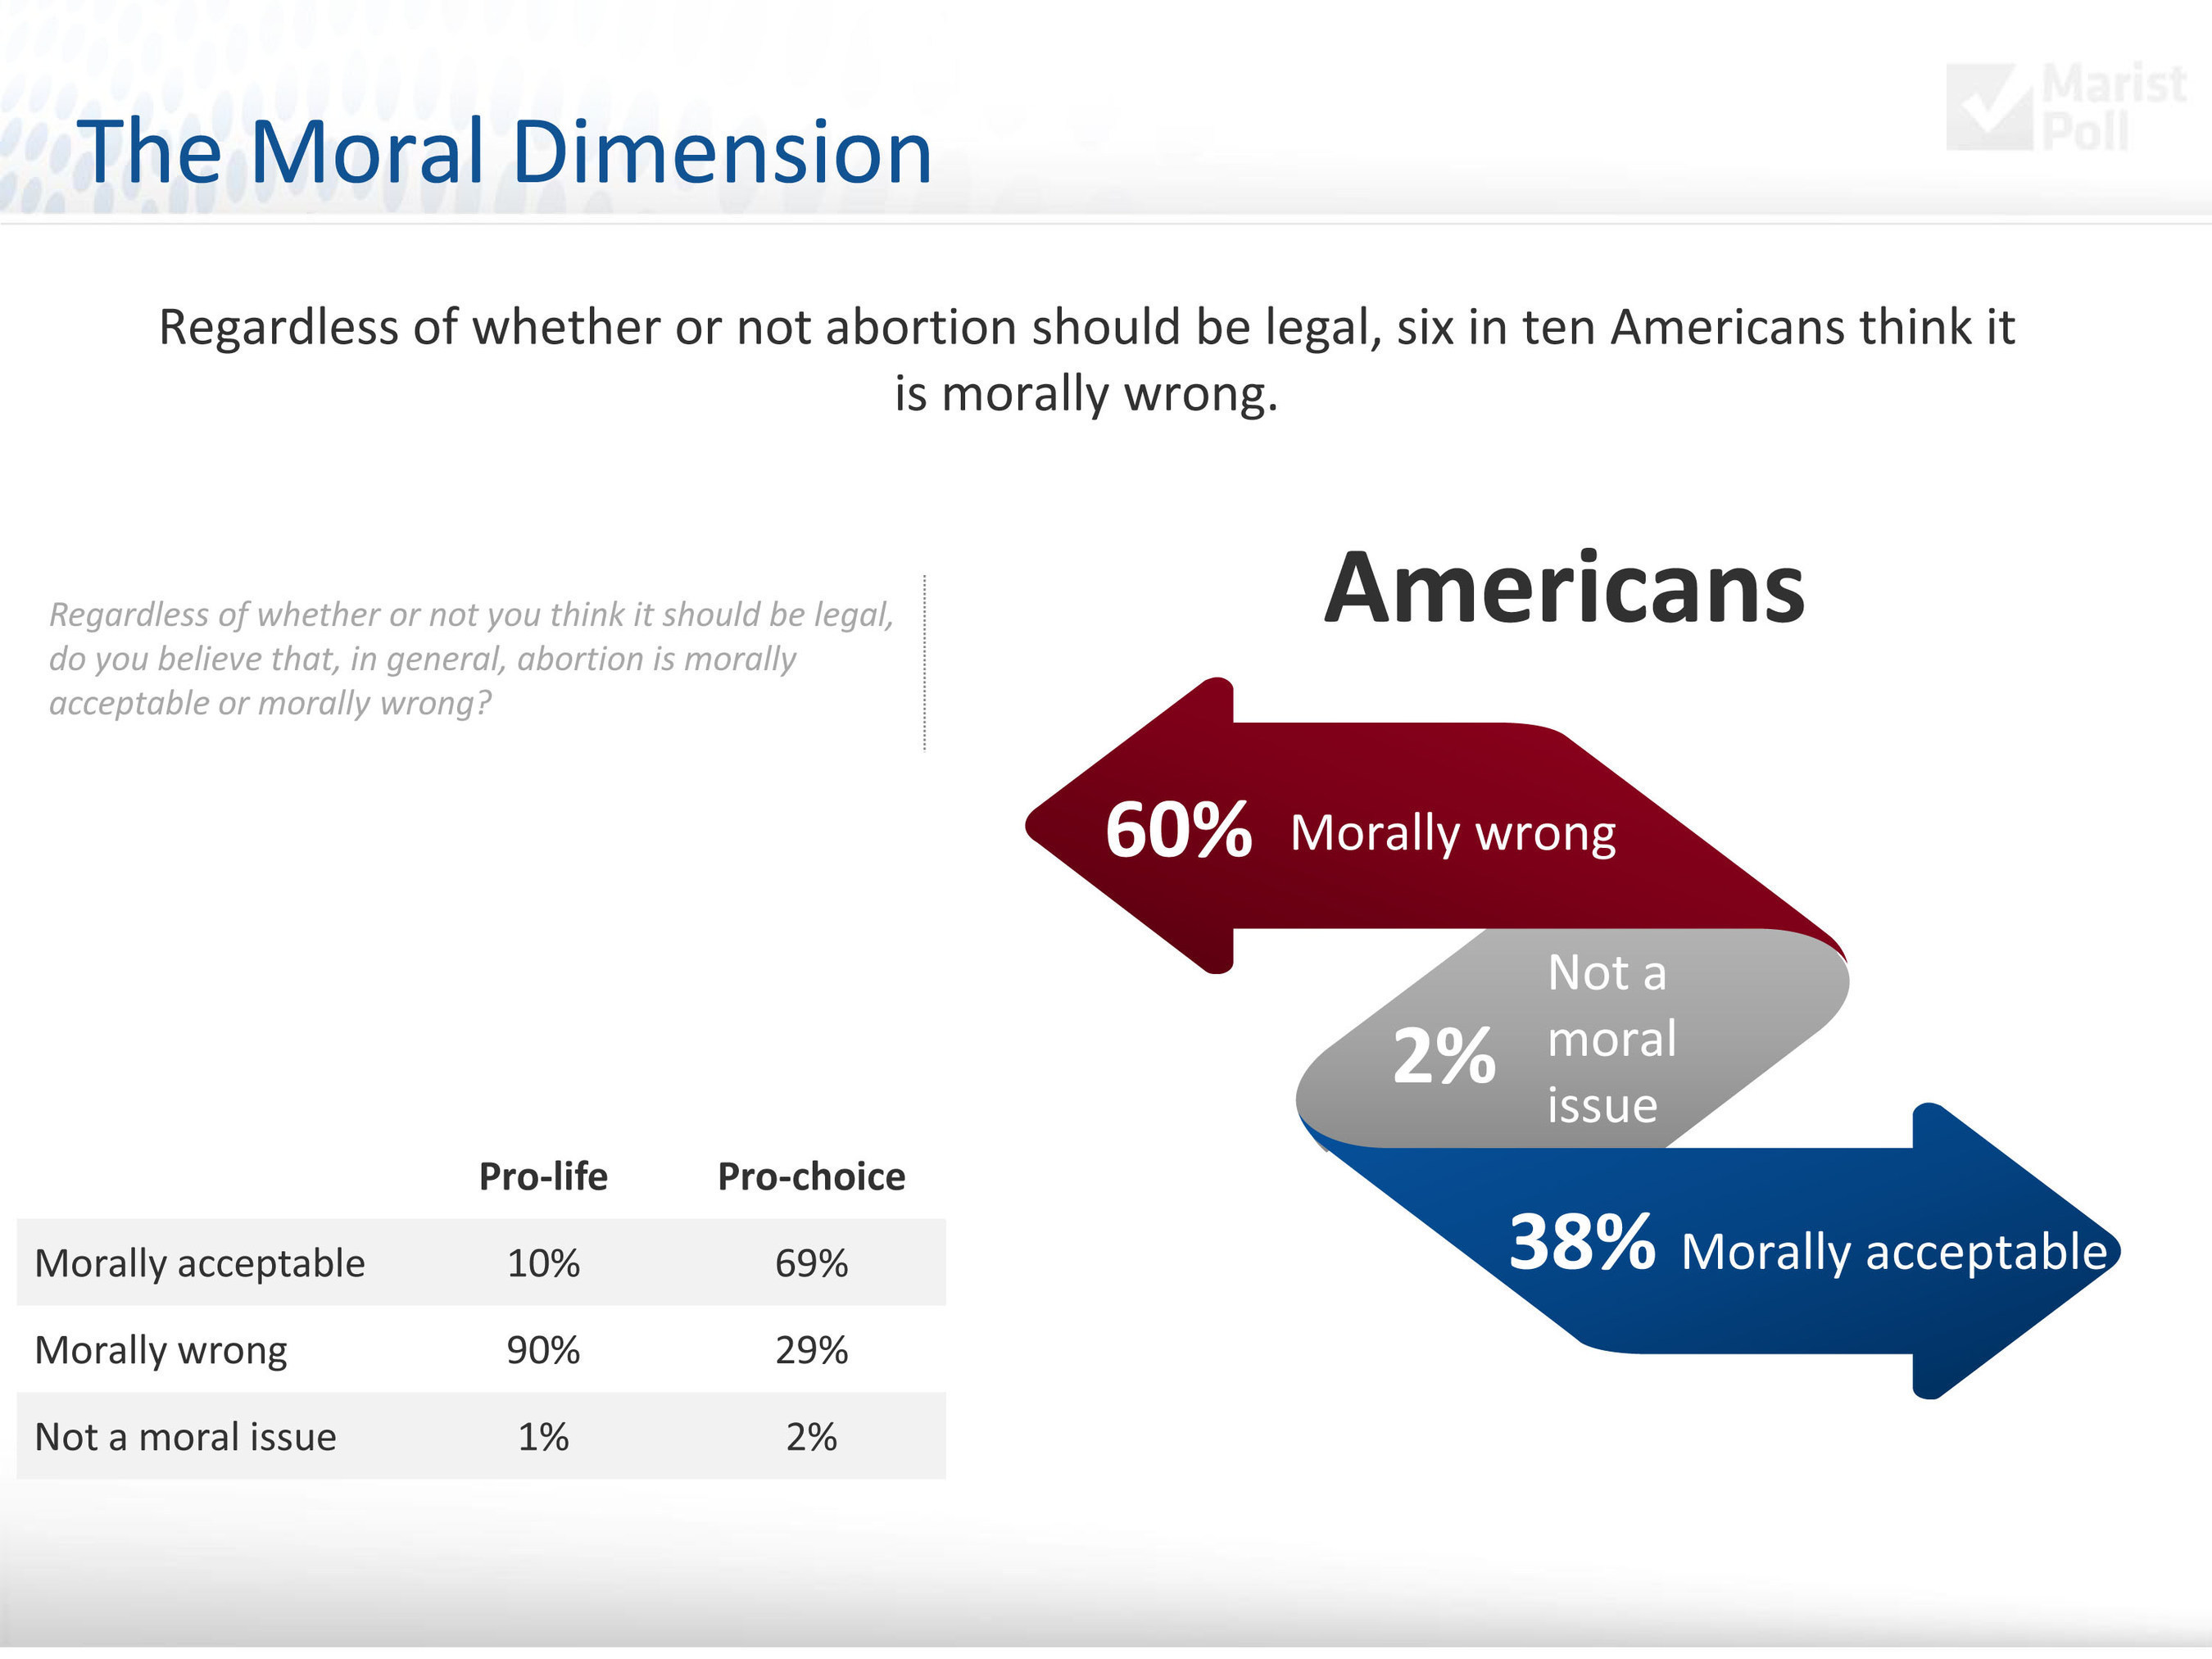 Abortion morally acceptable or not